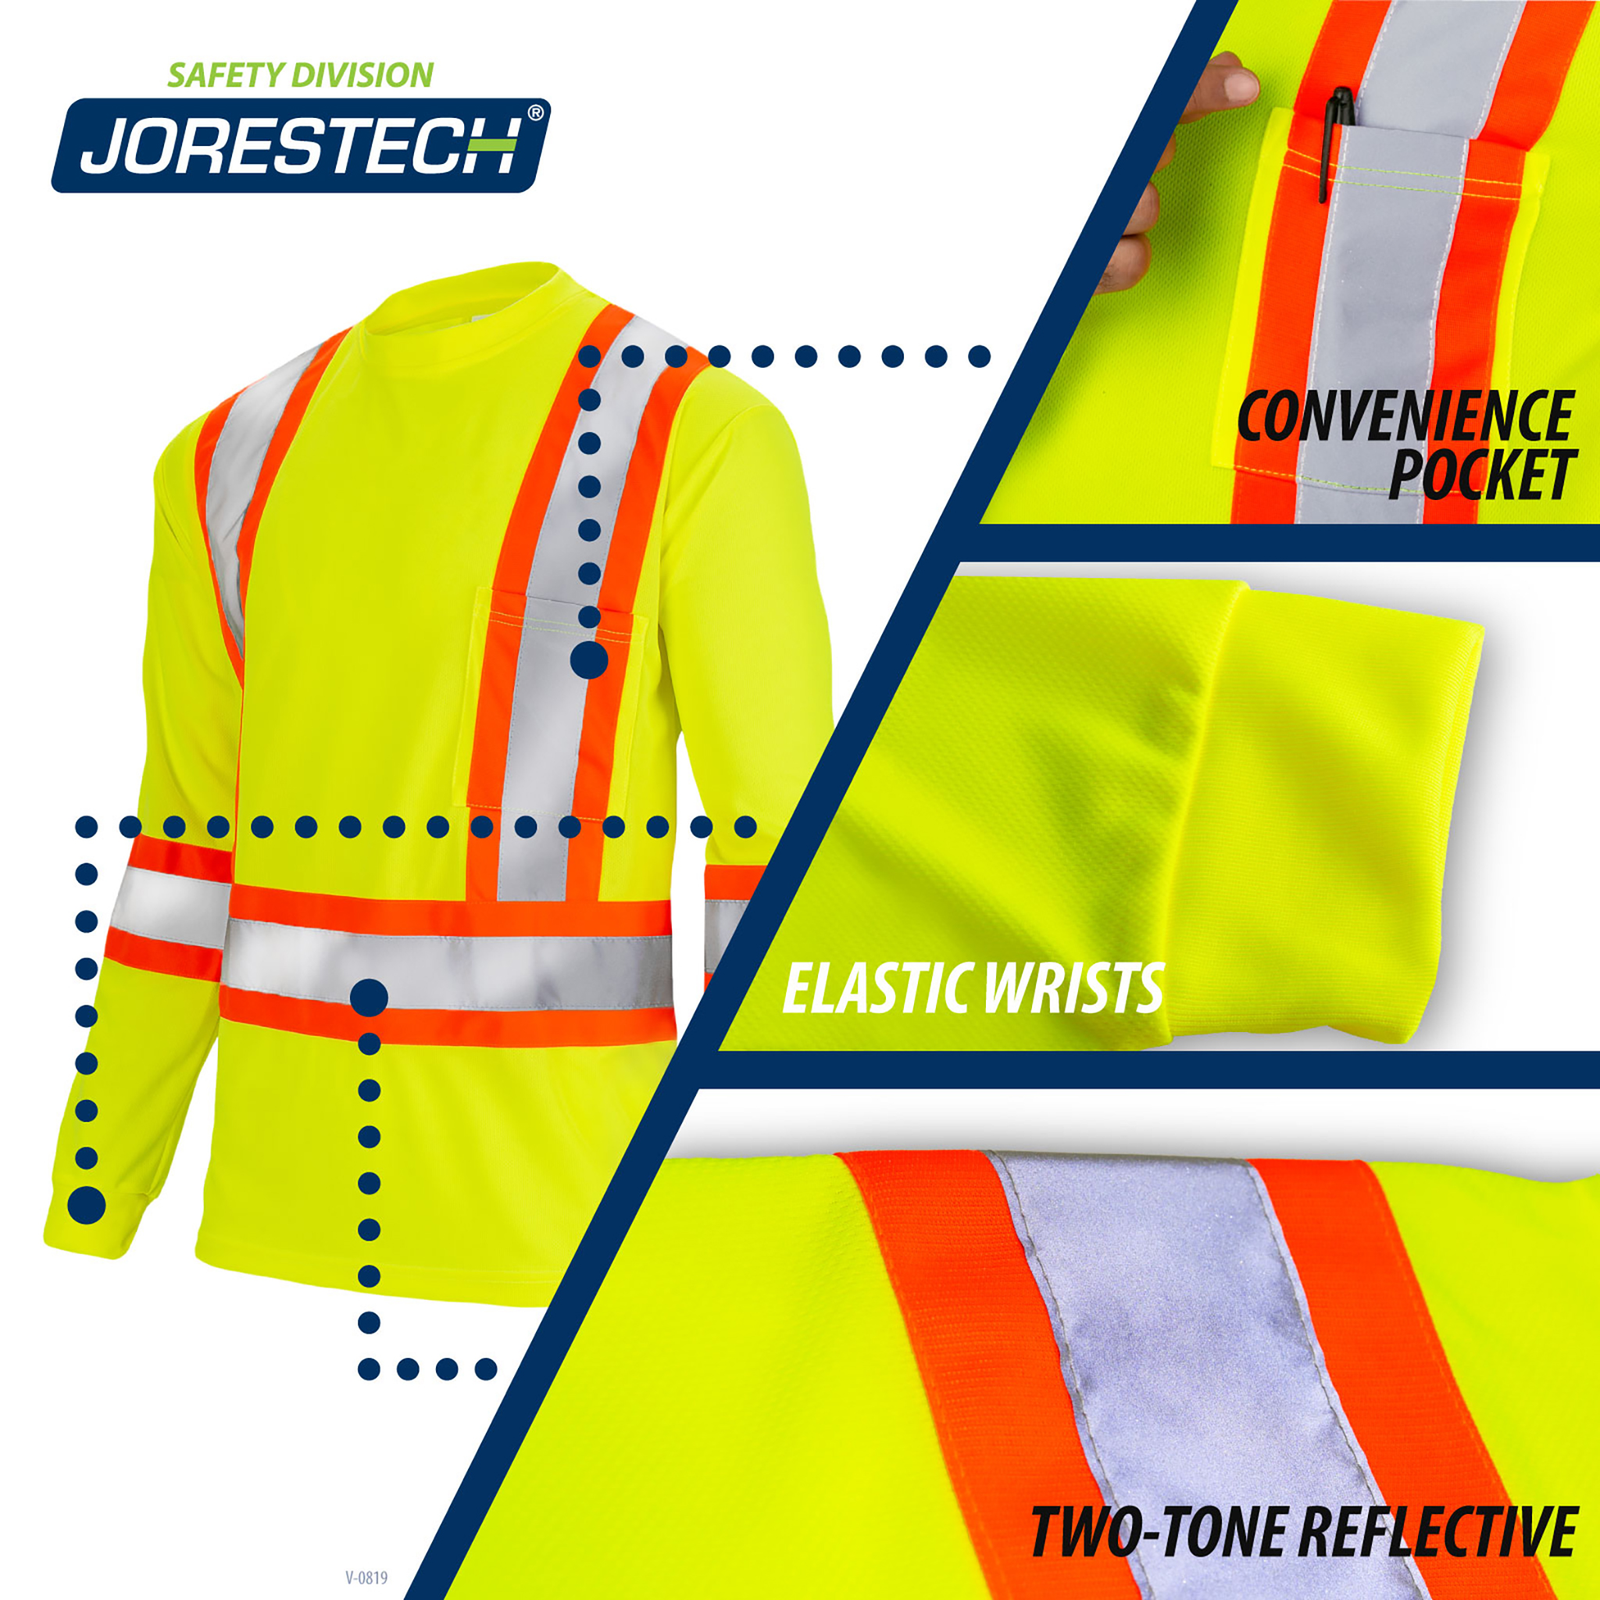 Safety shirt is shown with 3 call outs that read: Convenience chest pocket, two tone reflective and elastic wrists